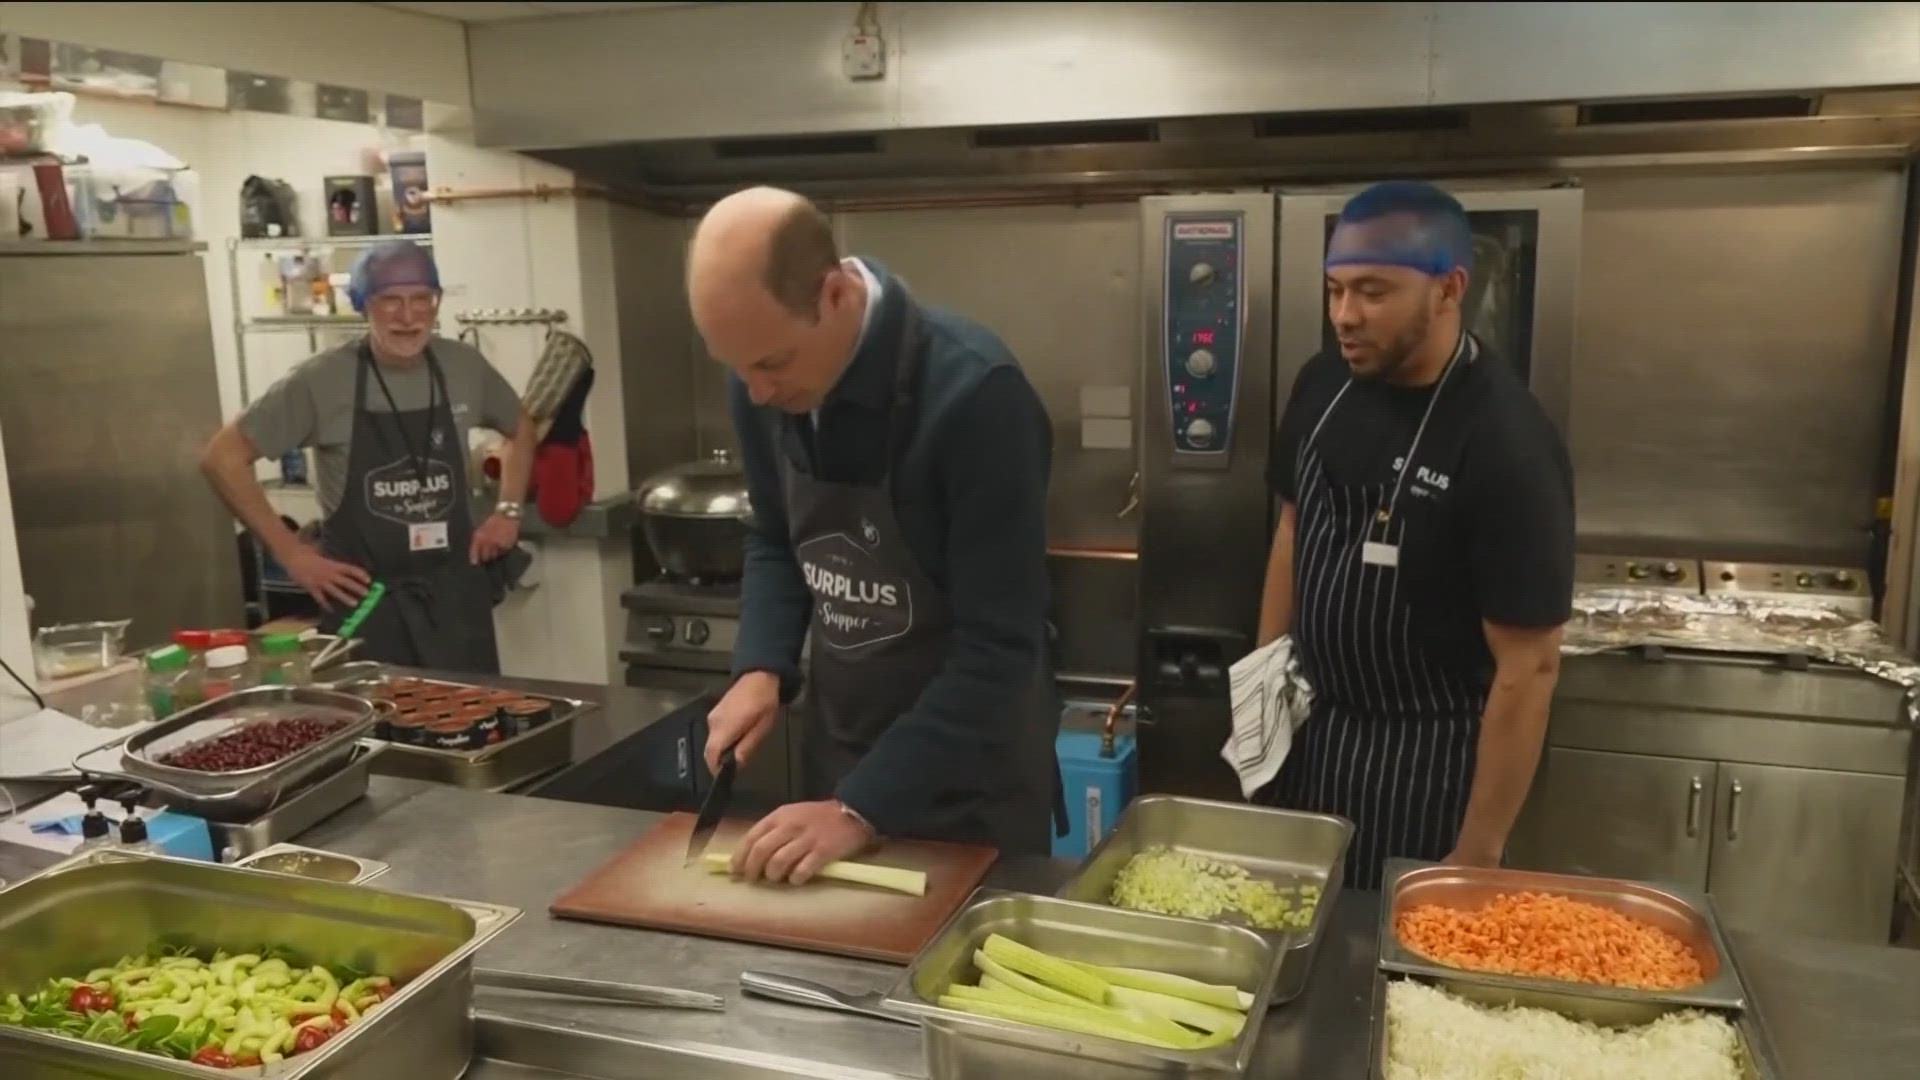 Prince William returned to his public duties Thursday, helping out a kitchen at a food distribution center in London.